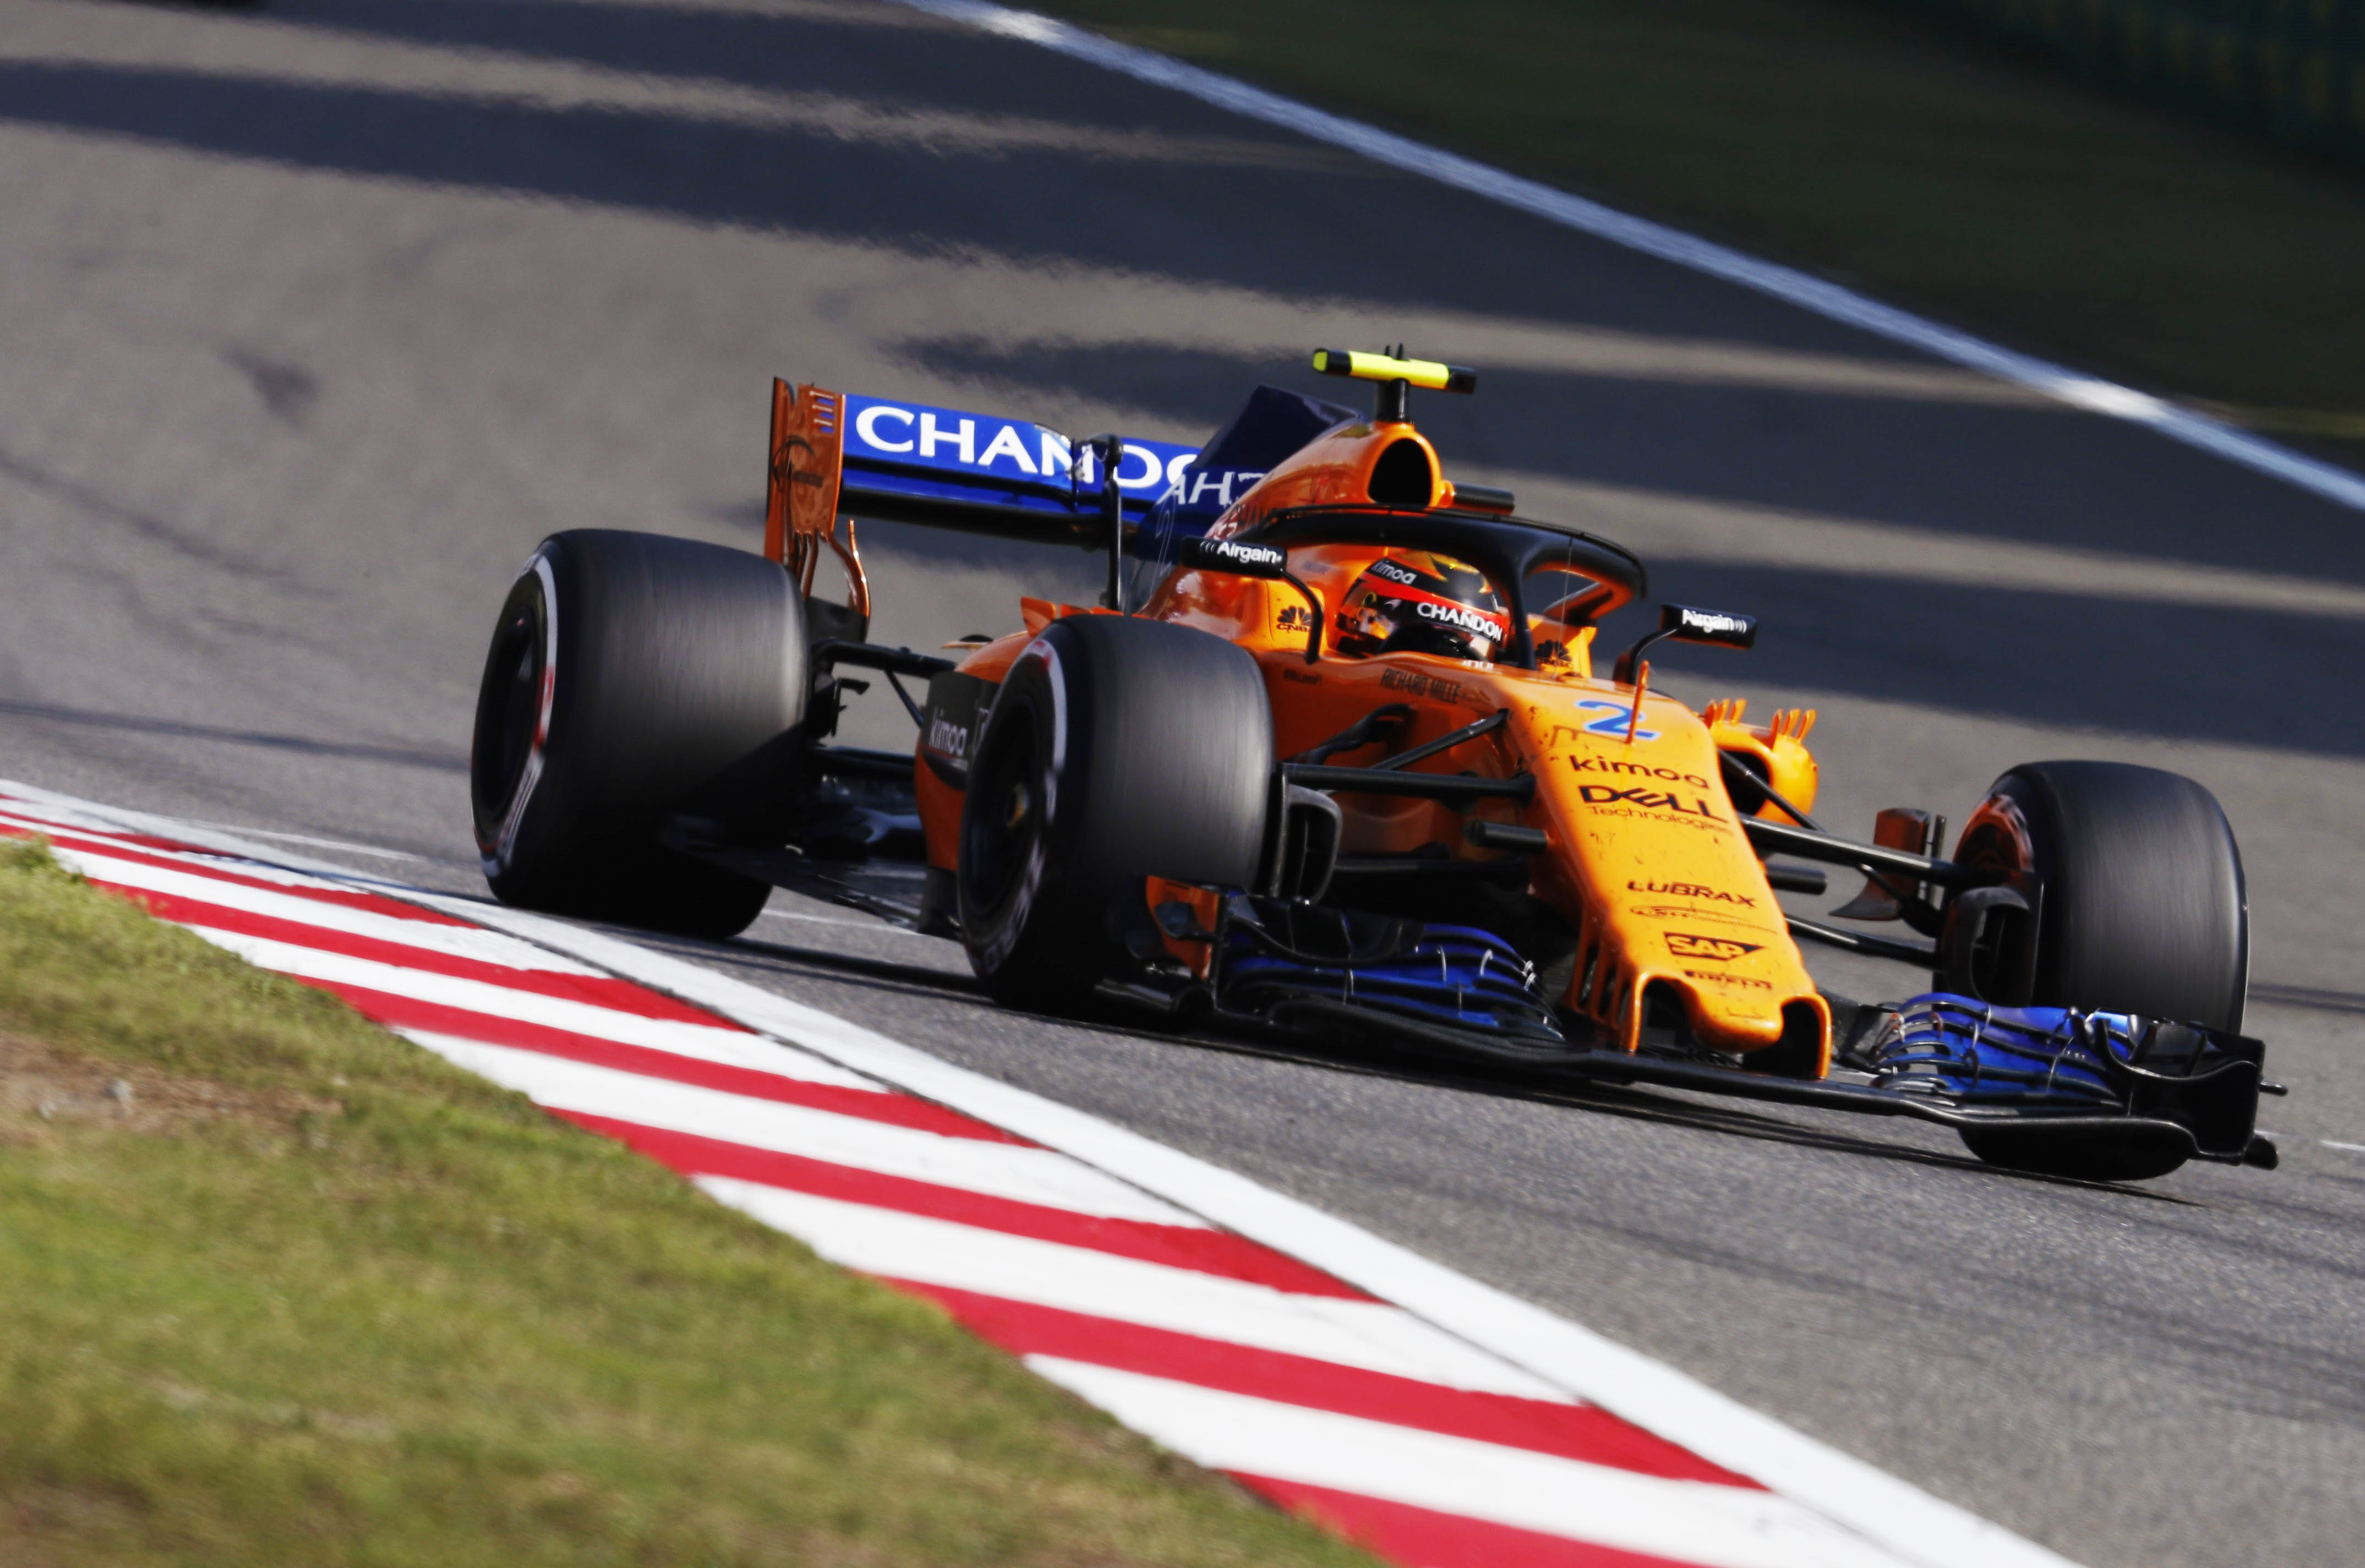 Photo of Mixed result for McLaren as Alonso finishes seventh and Vandoorne 13th